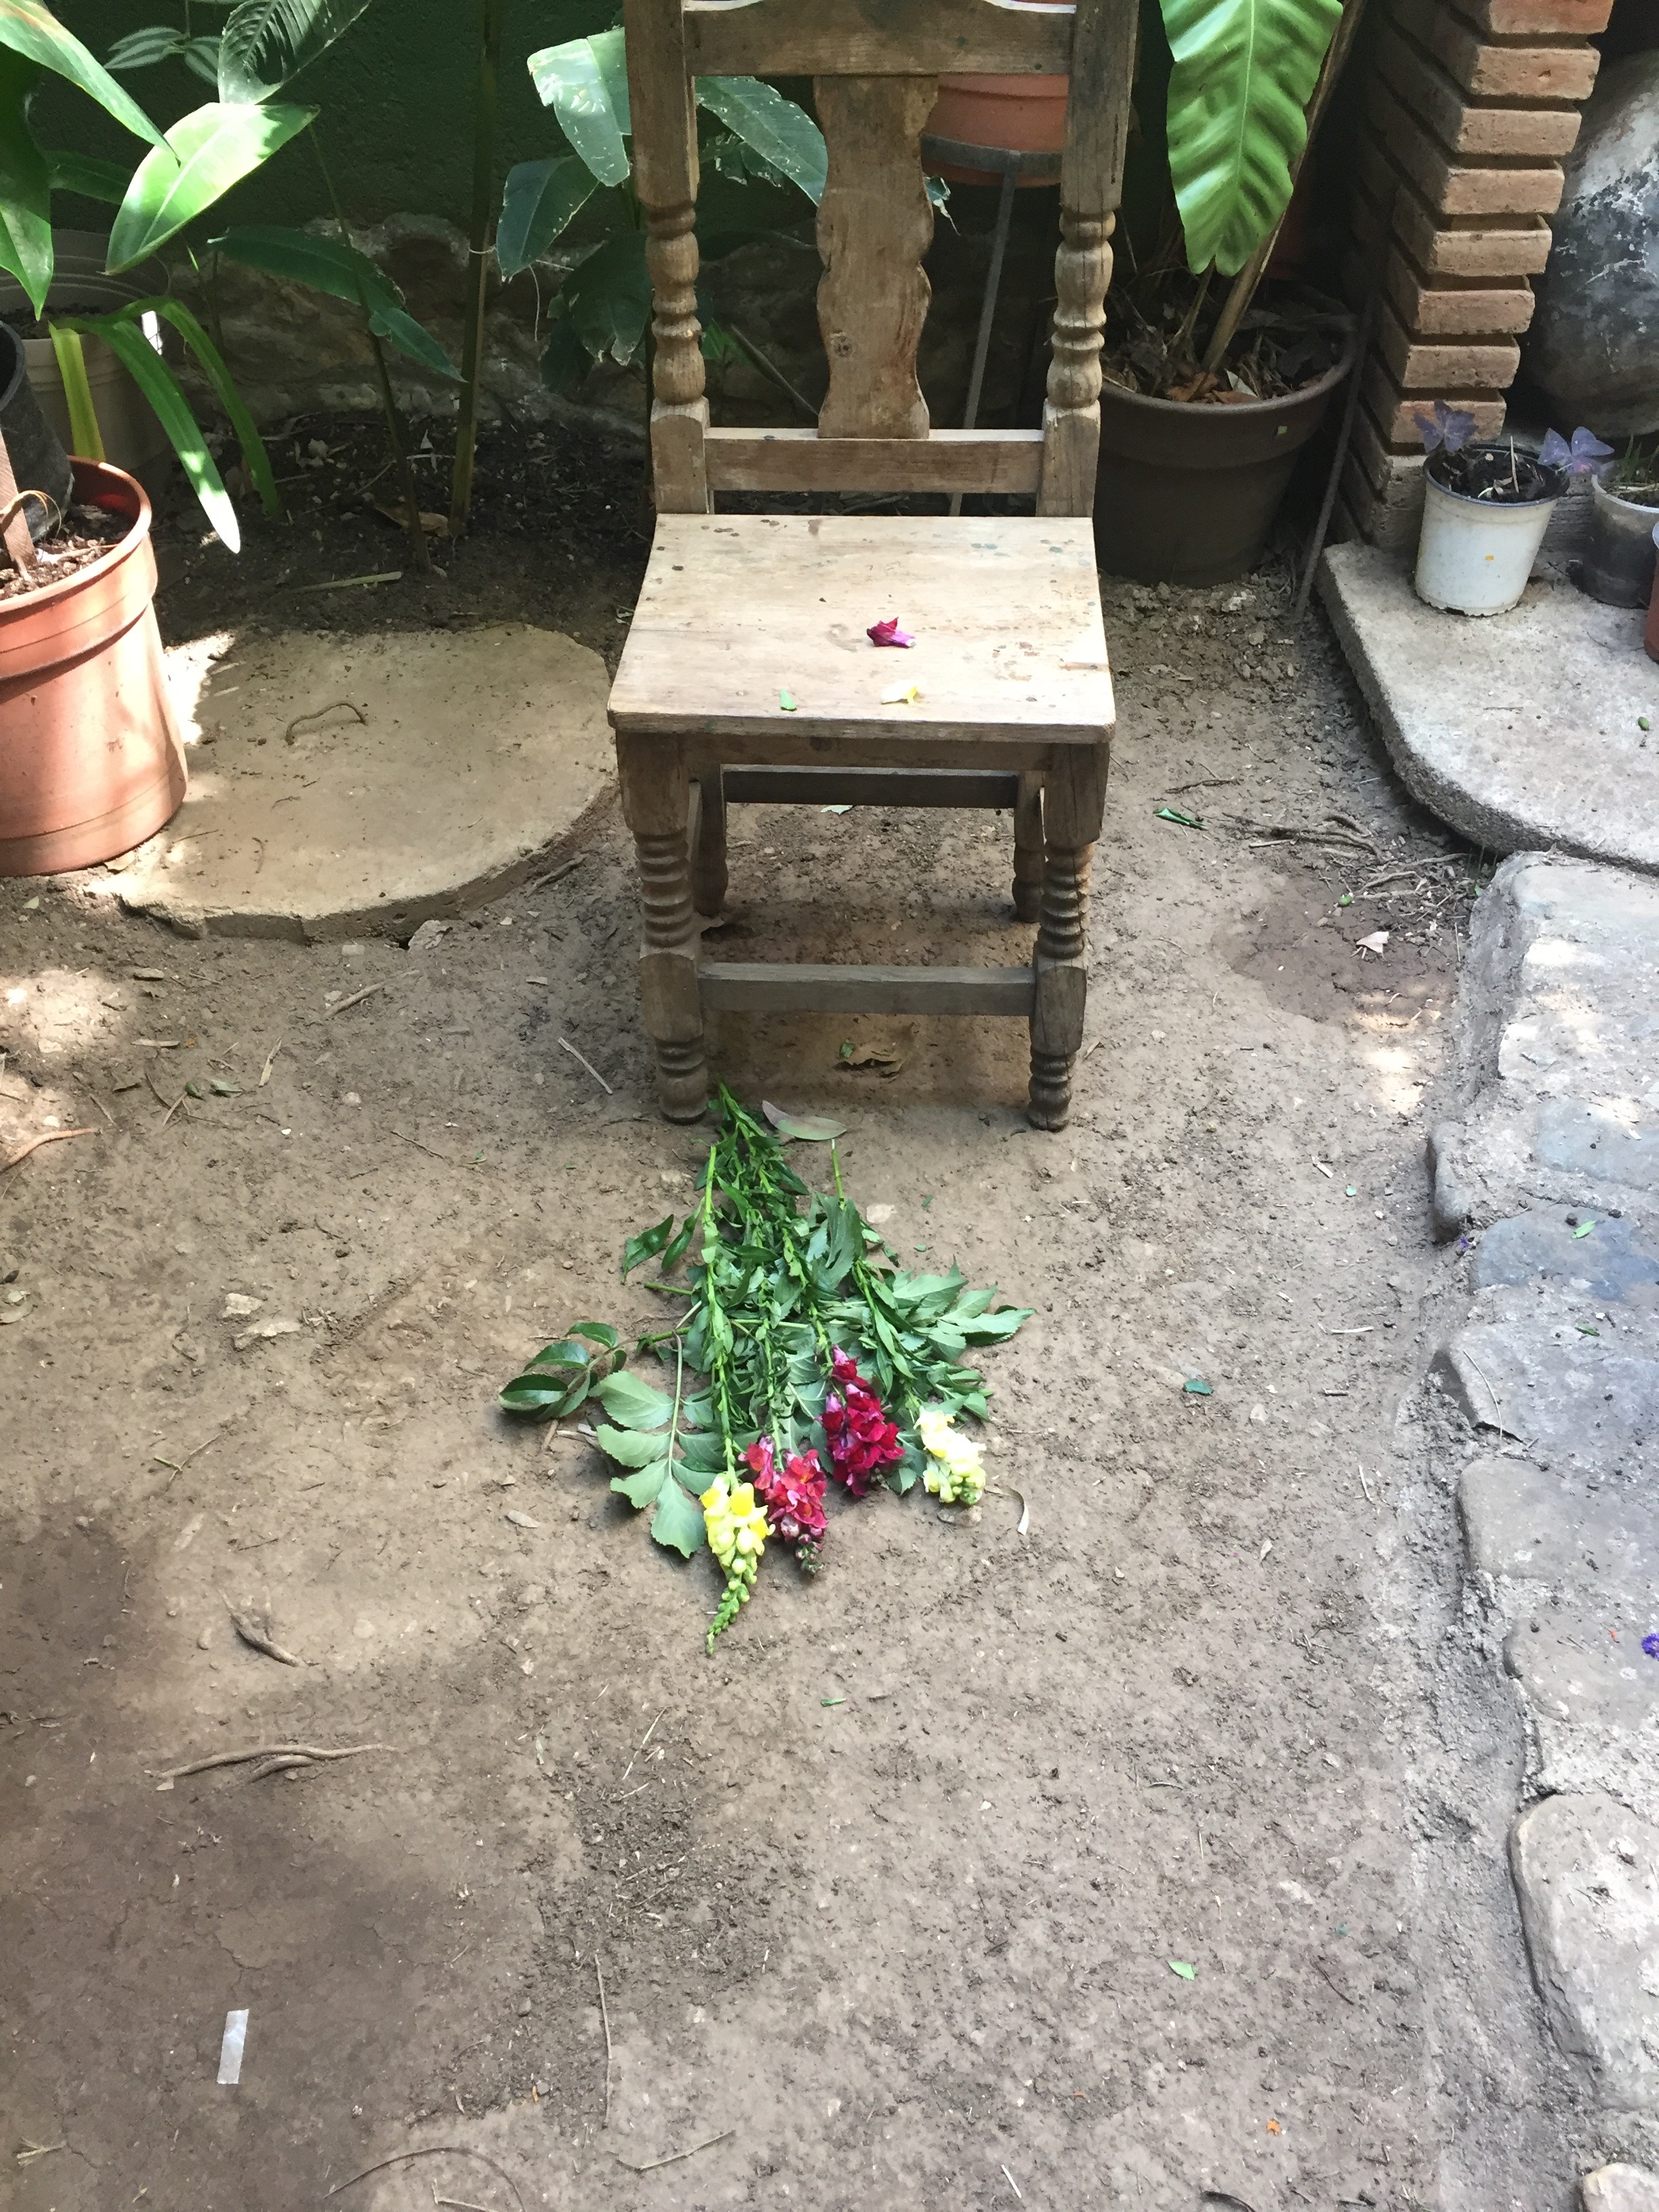 Image of flowers lain in front of an empty chair, taken at the house of Doña Queta, an eminent Zapotec healer and midwife in Oaxaca. The author participated in the ritual of susto by receiving a ritual cleansing (limpia) that required a flower offering. The photograph was taken by the author with Doña Queta’s permission.